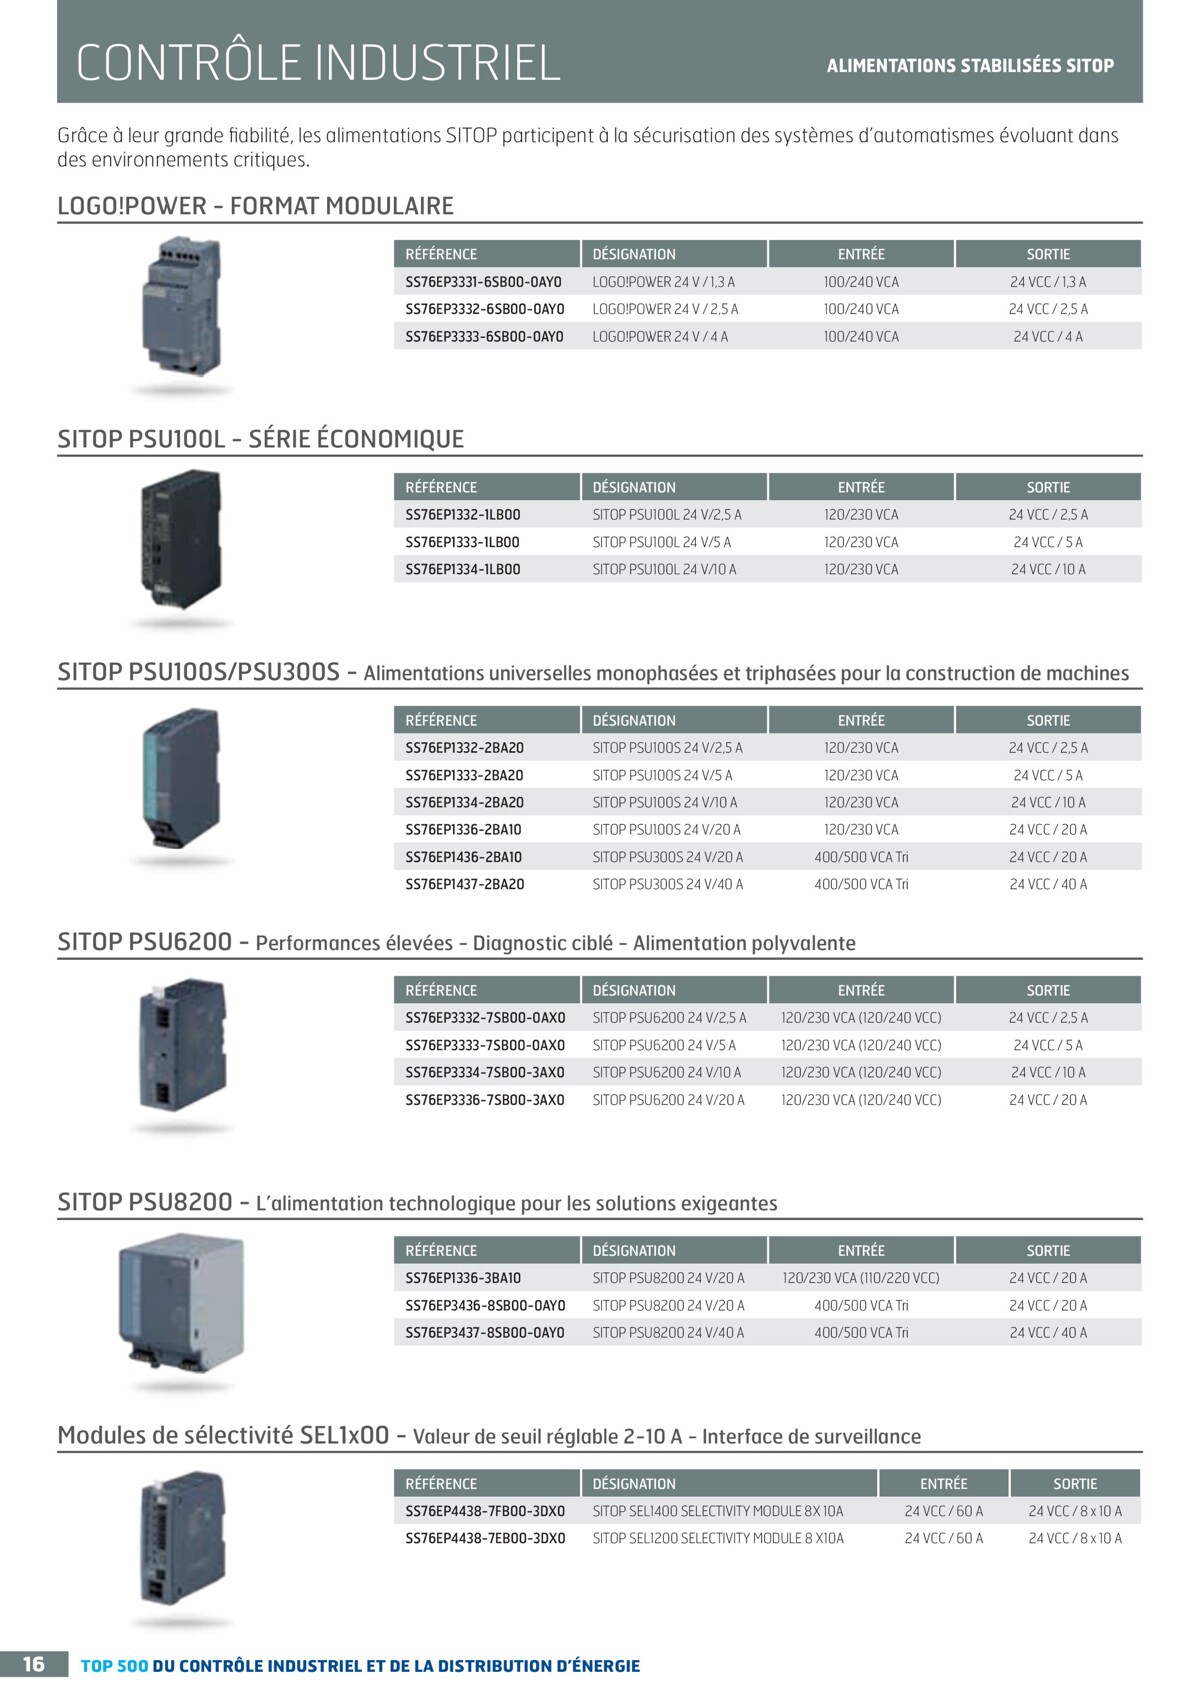 Catalogue TOP 500 siemens - Rexel, page 00016